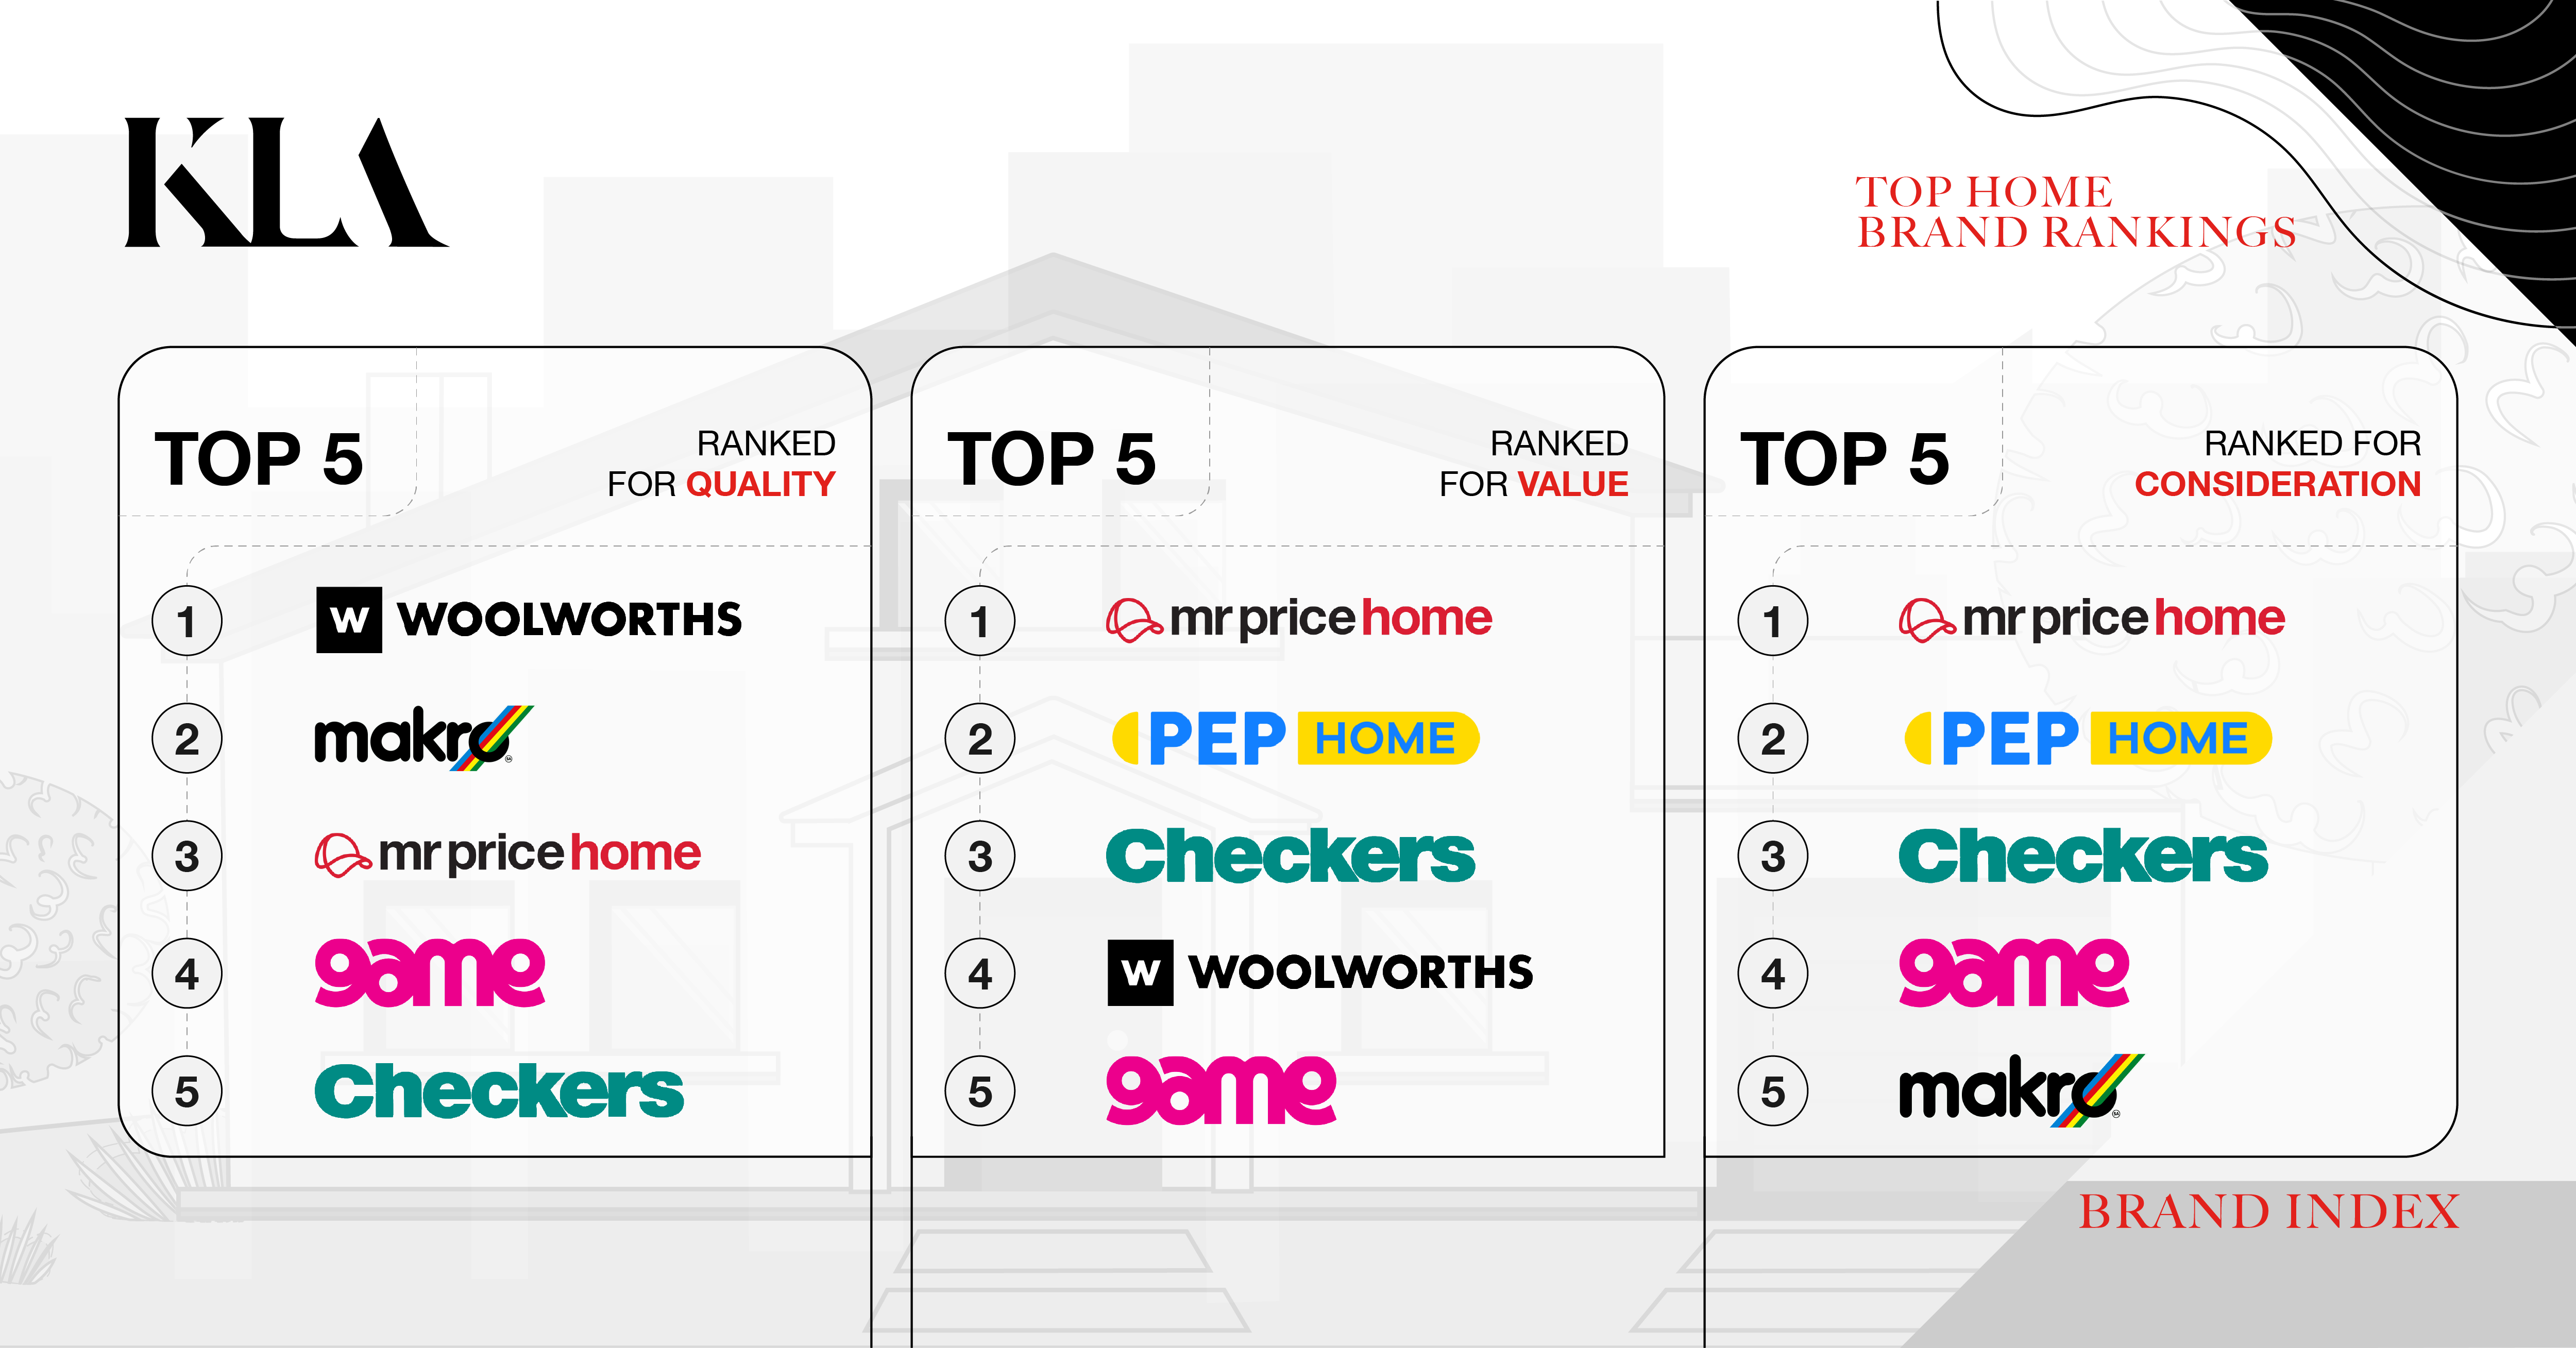 Top-performing home retail brands in South Africa: